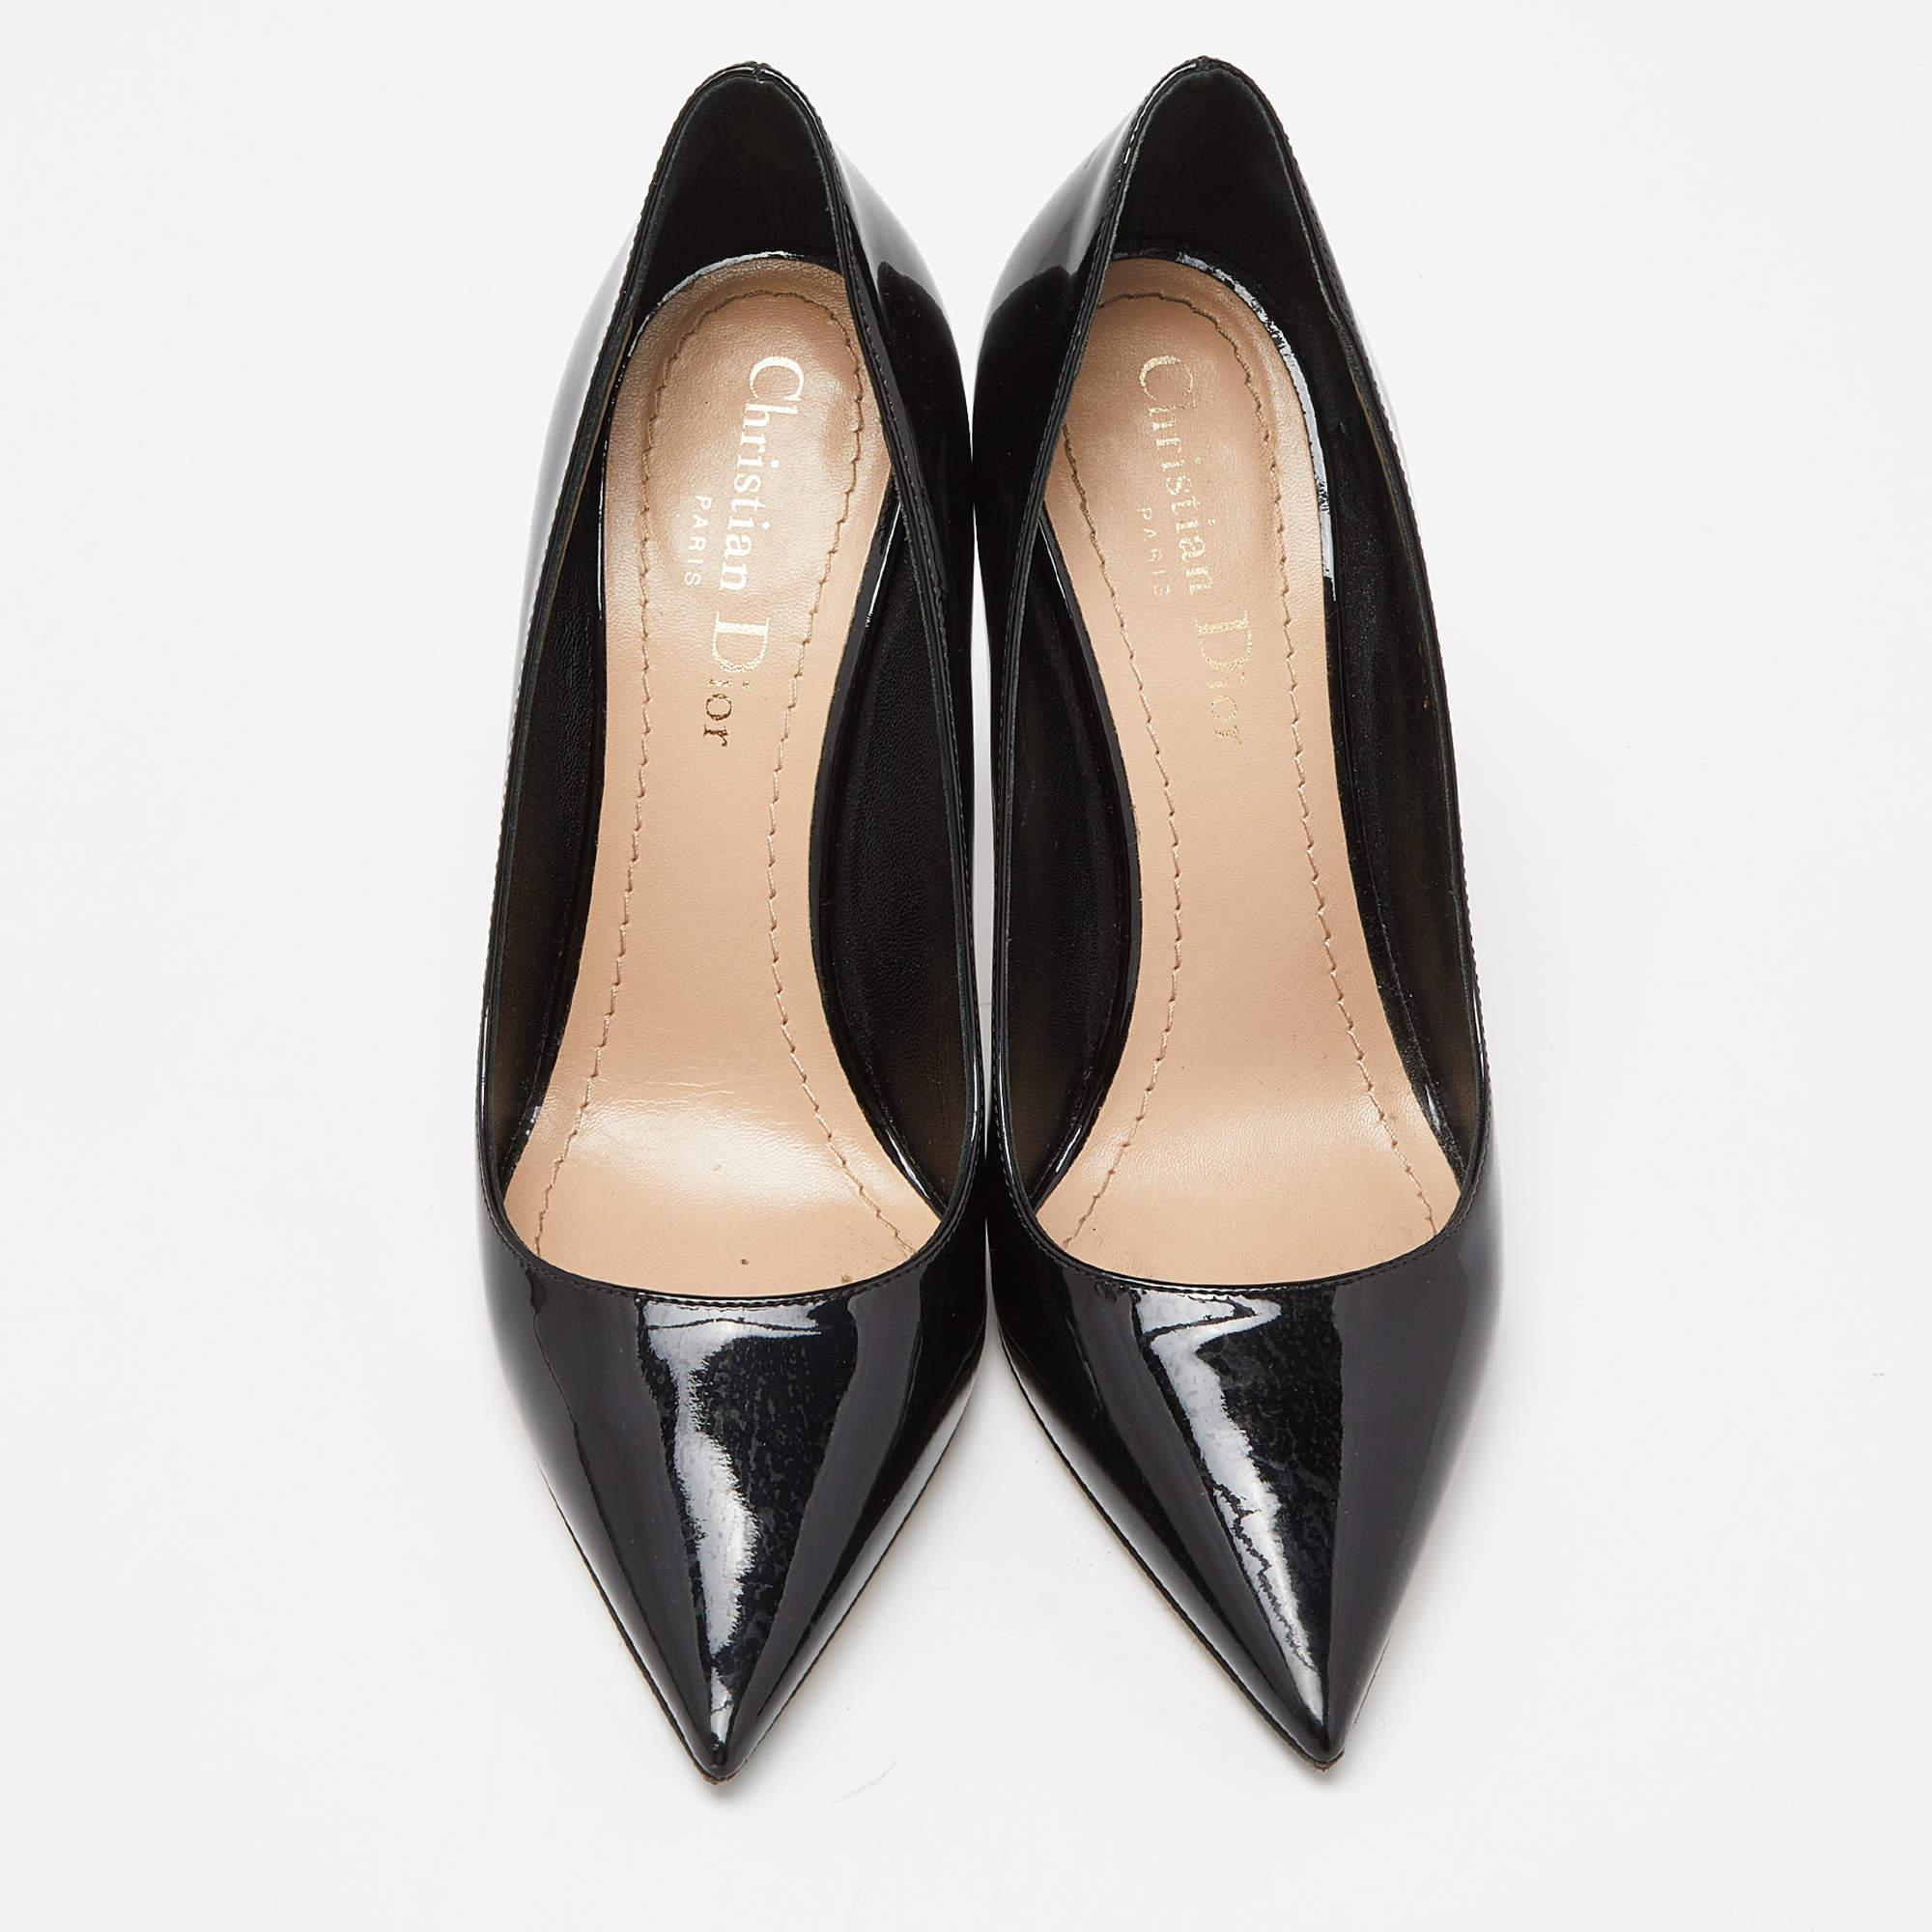 The fashion house’s tradition of excellence, coupled with modern design sensibilities, works to make these pumps a fabulous choice. They'll help you deliver a chic look with ease.

Includes: Original Dustbag

